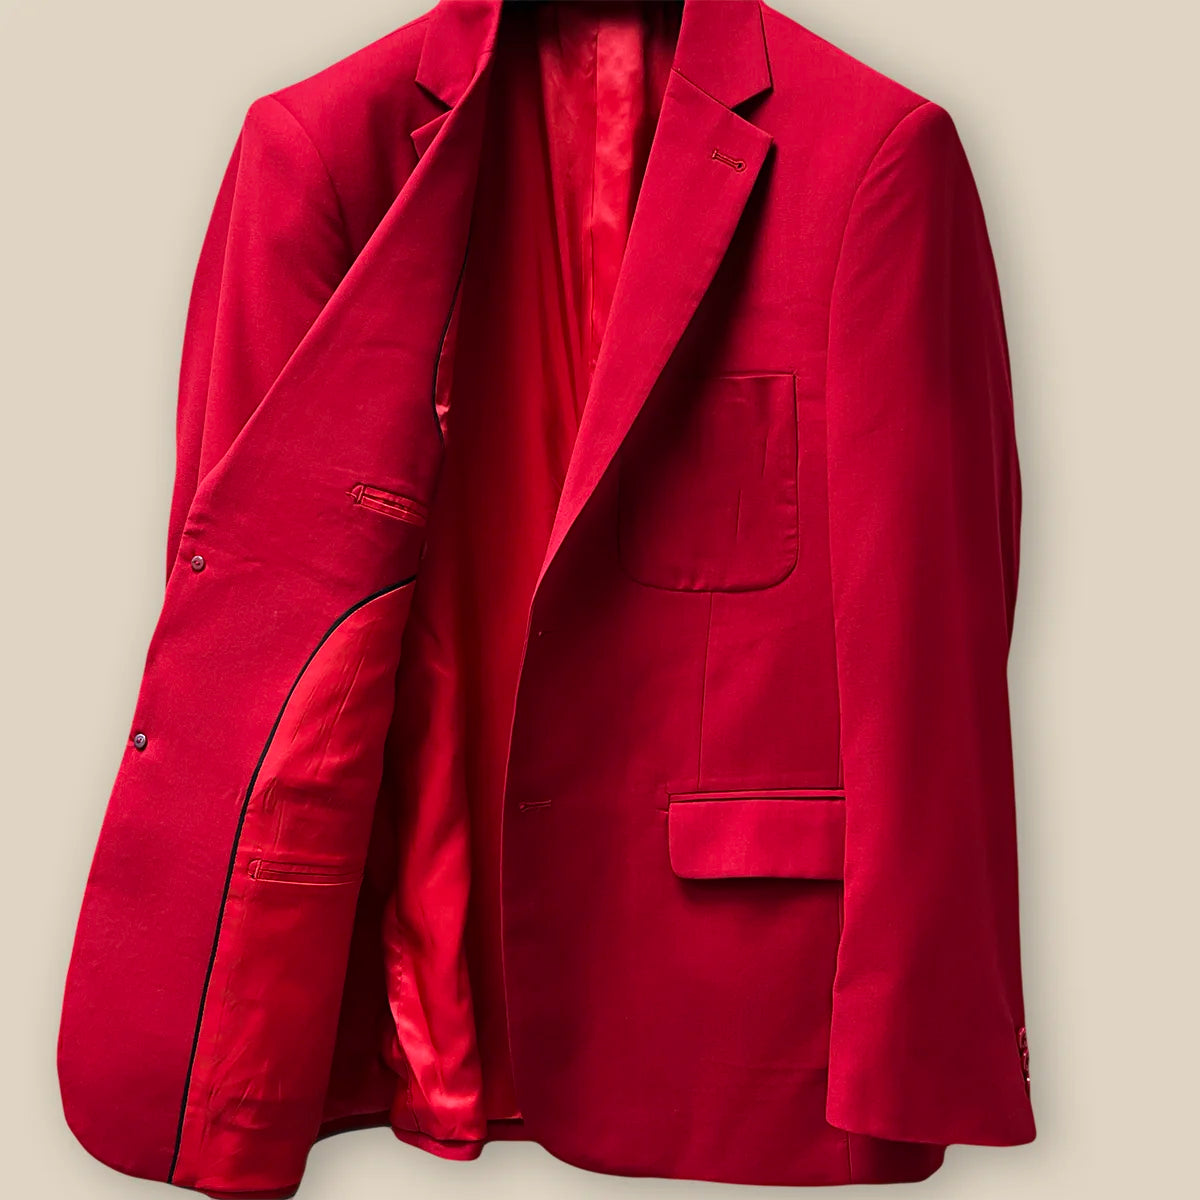 Inside jacket right view revealing the interior craftsmanship on a scarlet red, solid plain color suit.